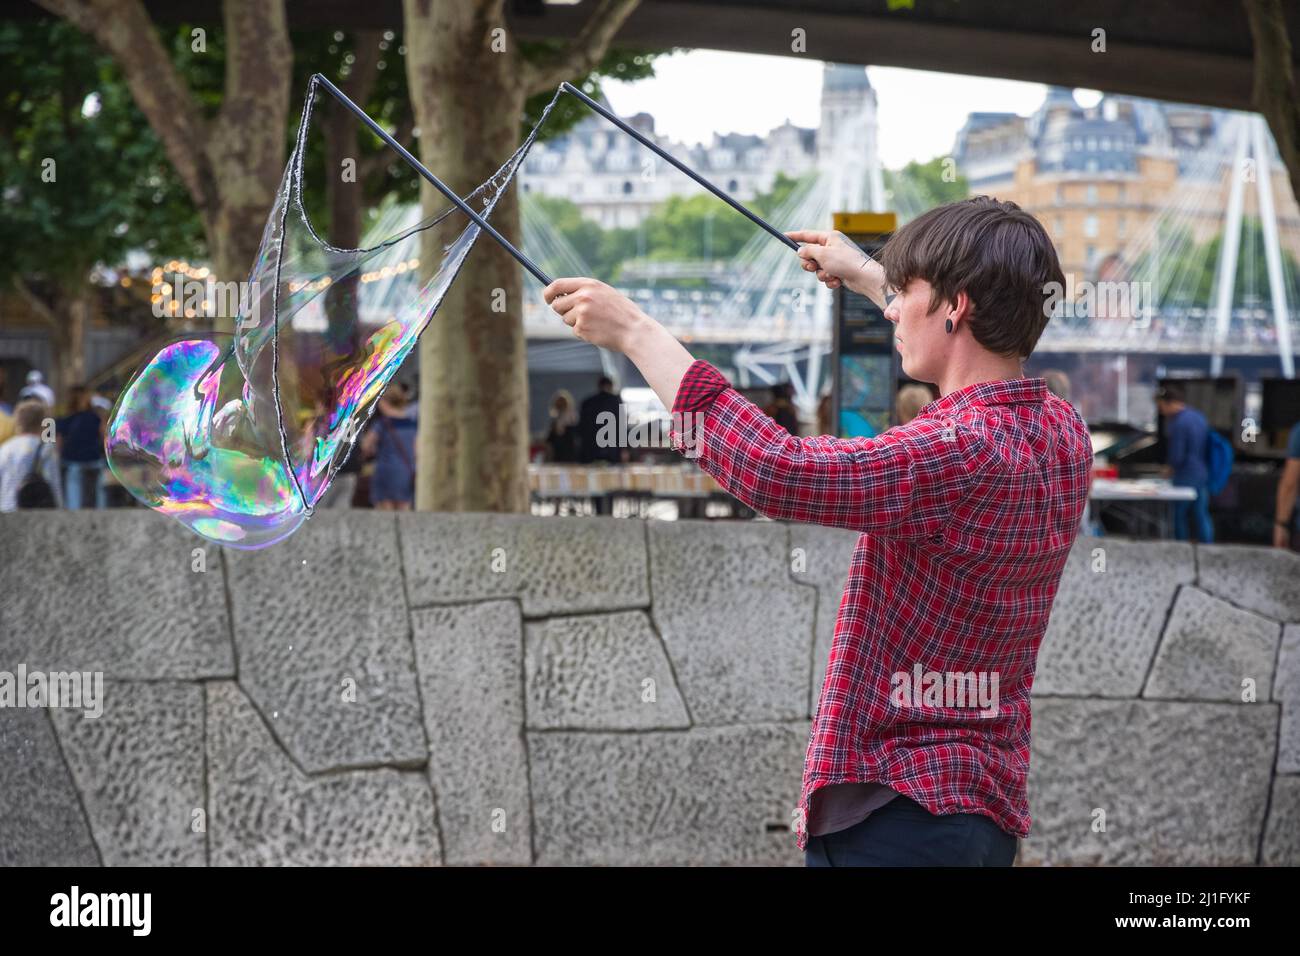 London, UK - July 19, 2021 - A soap bubble street performer at the South Bank district in central London Stock Photo